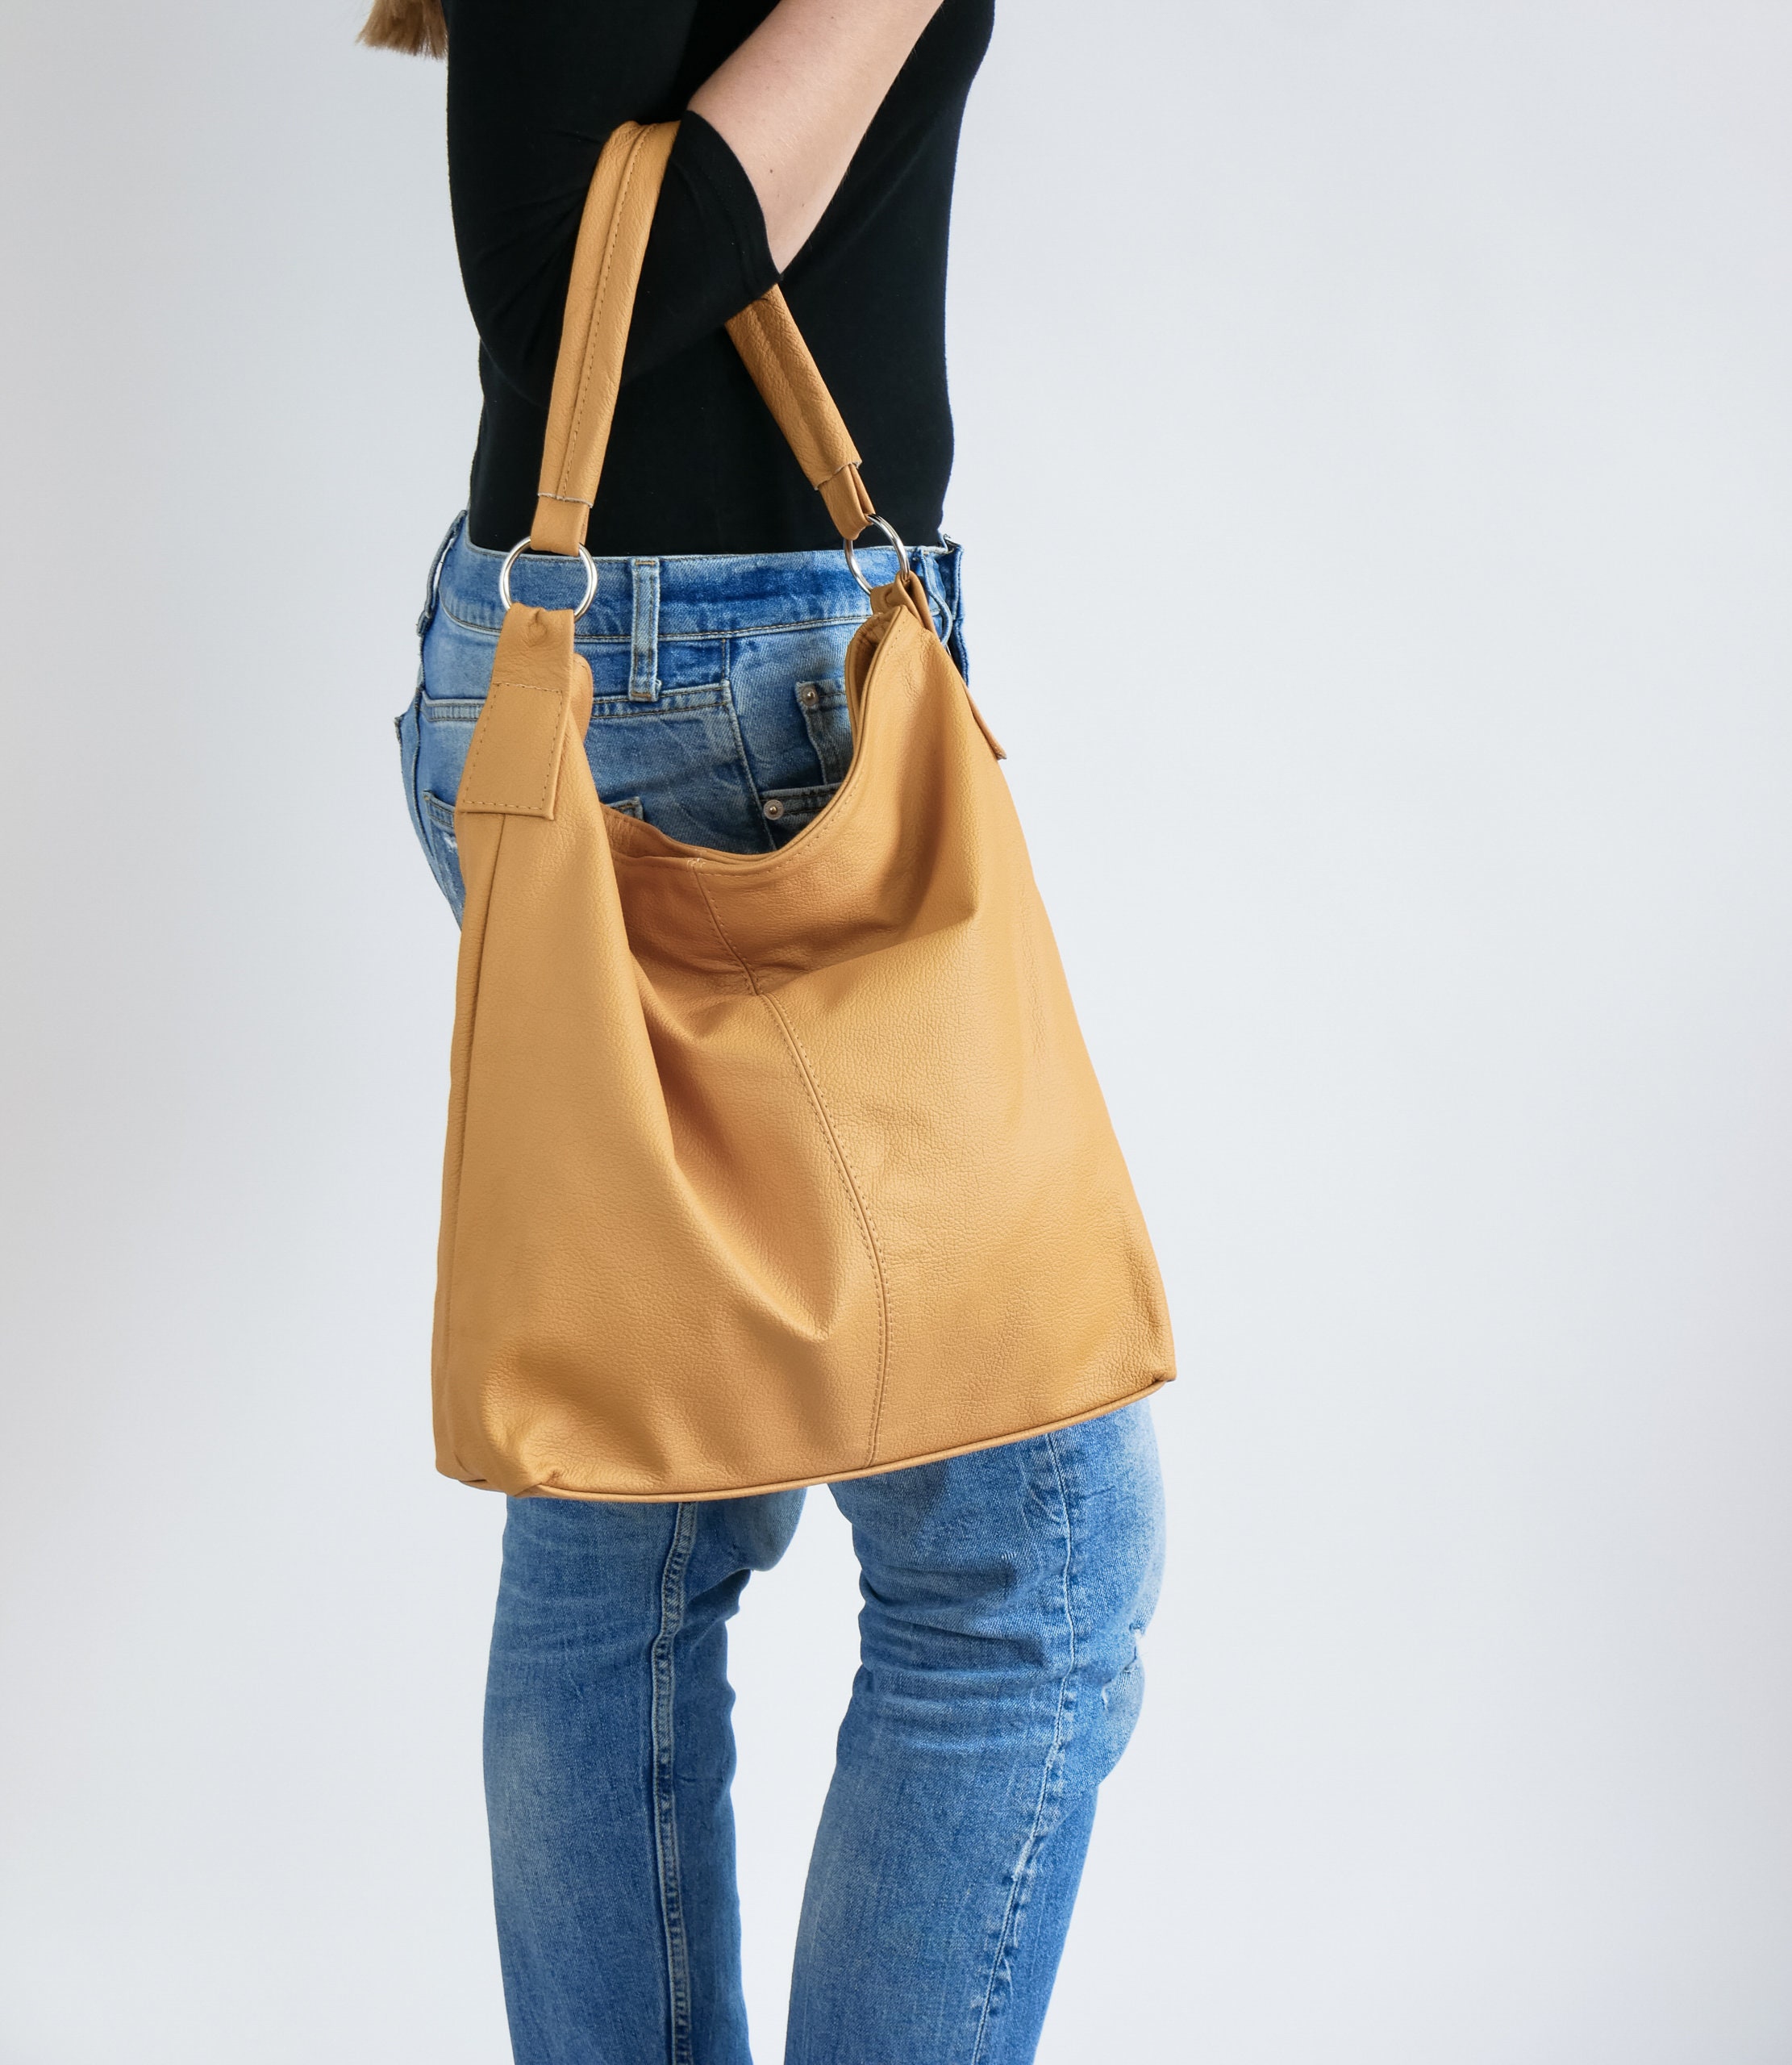 Merci Marie distressed Tote leather bag